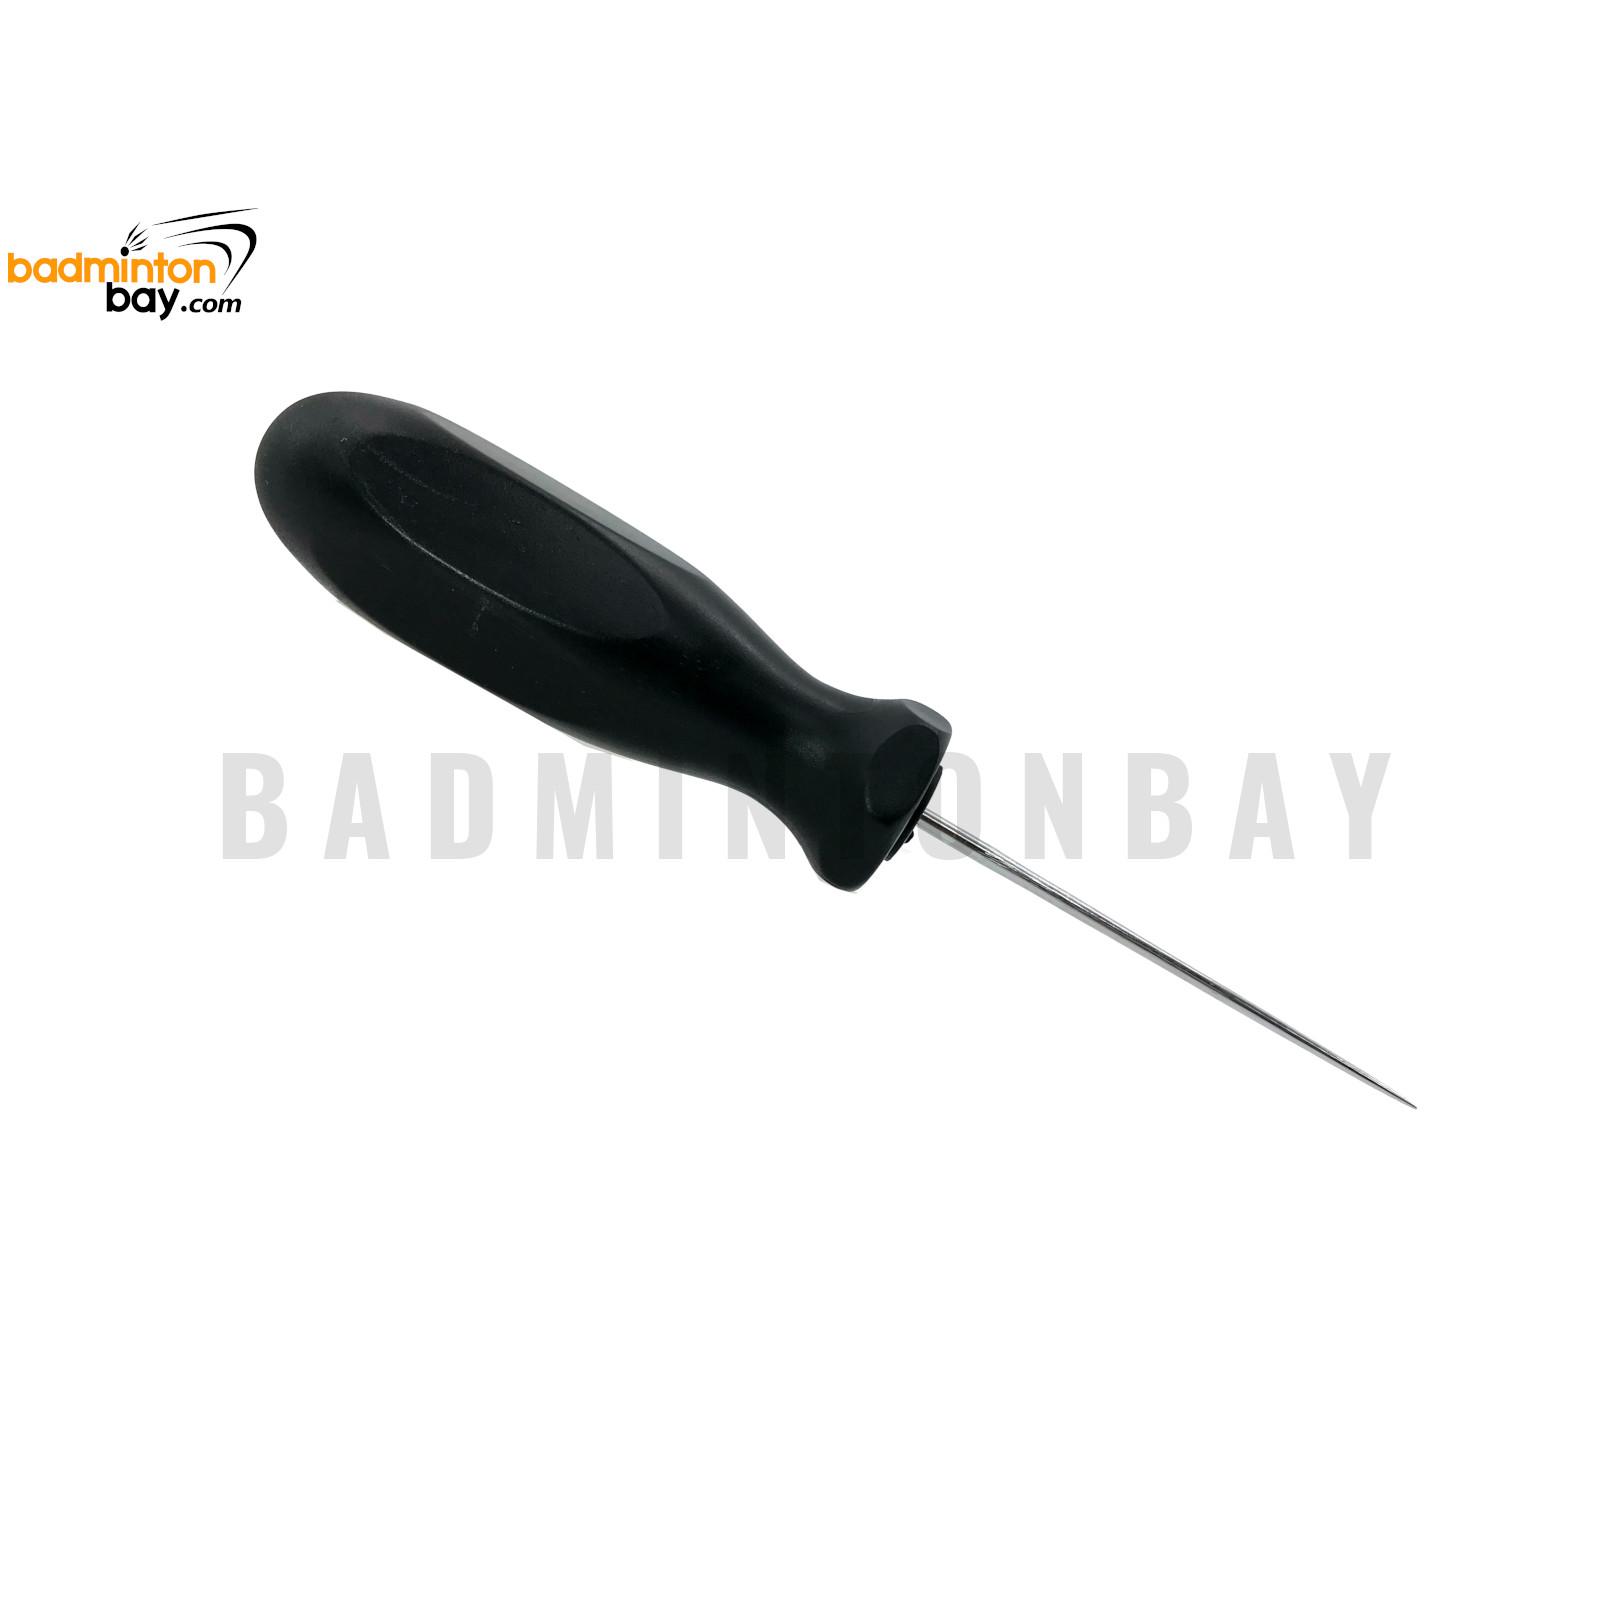 Details about   Stringing Racket Tool Straight Awl Tennis Sports Access Badminton Equipment AA 